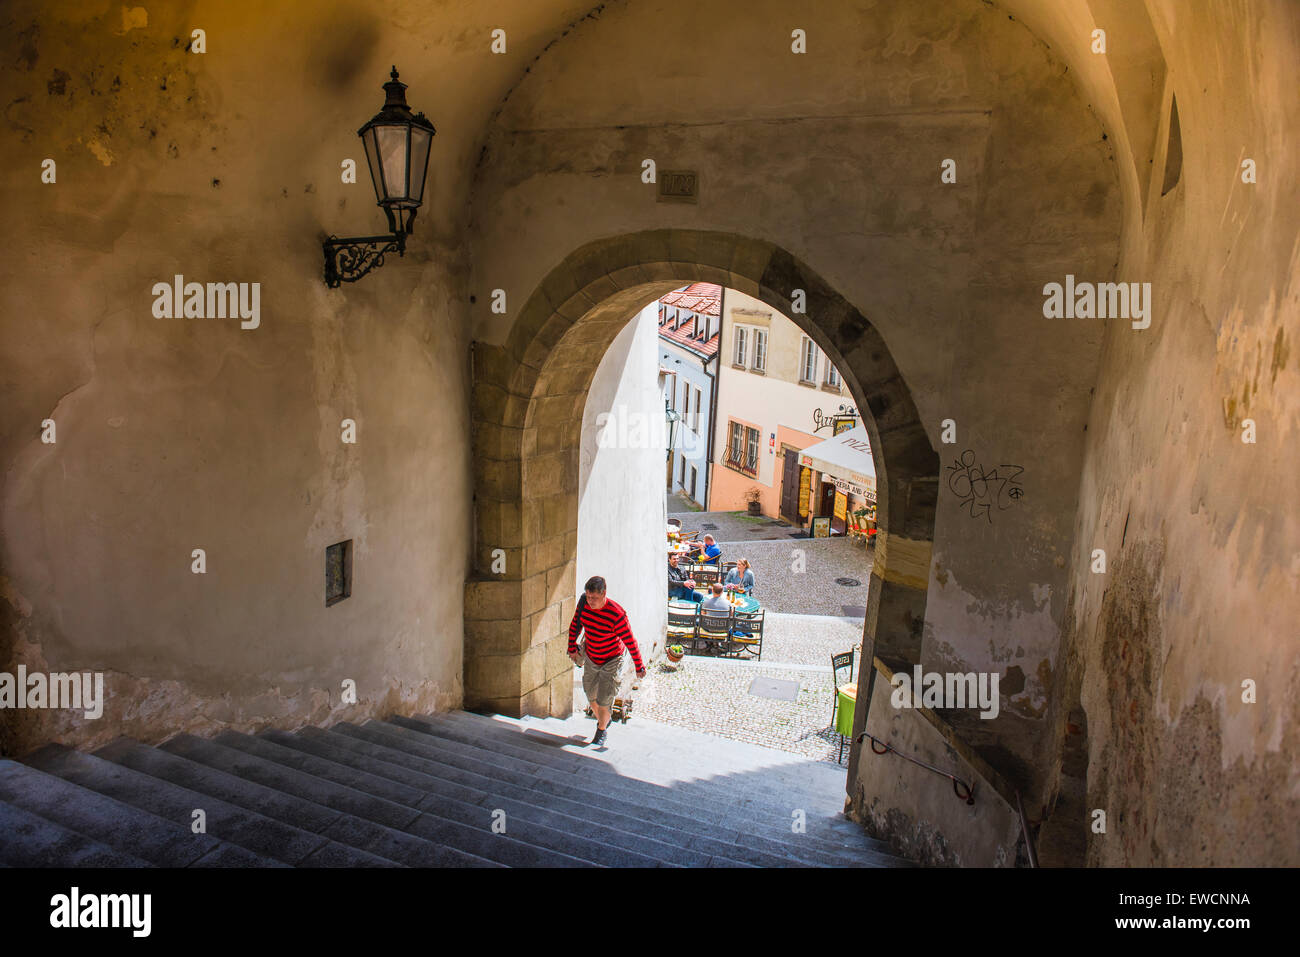 View of a man entering a typical medieval arcade in the historic Old Town Hradcany district of Prague, Czech Republic. Stock Photo